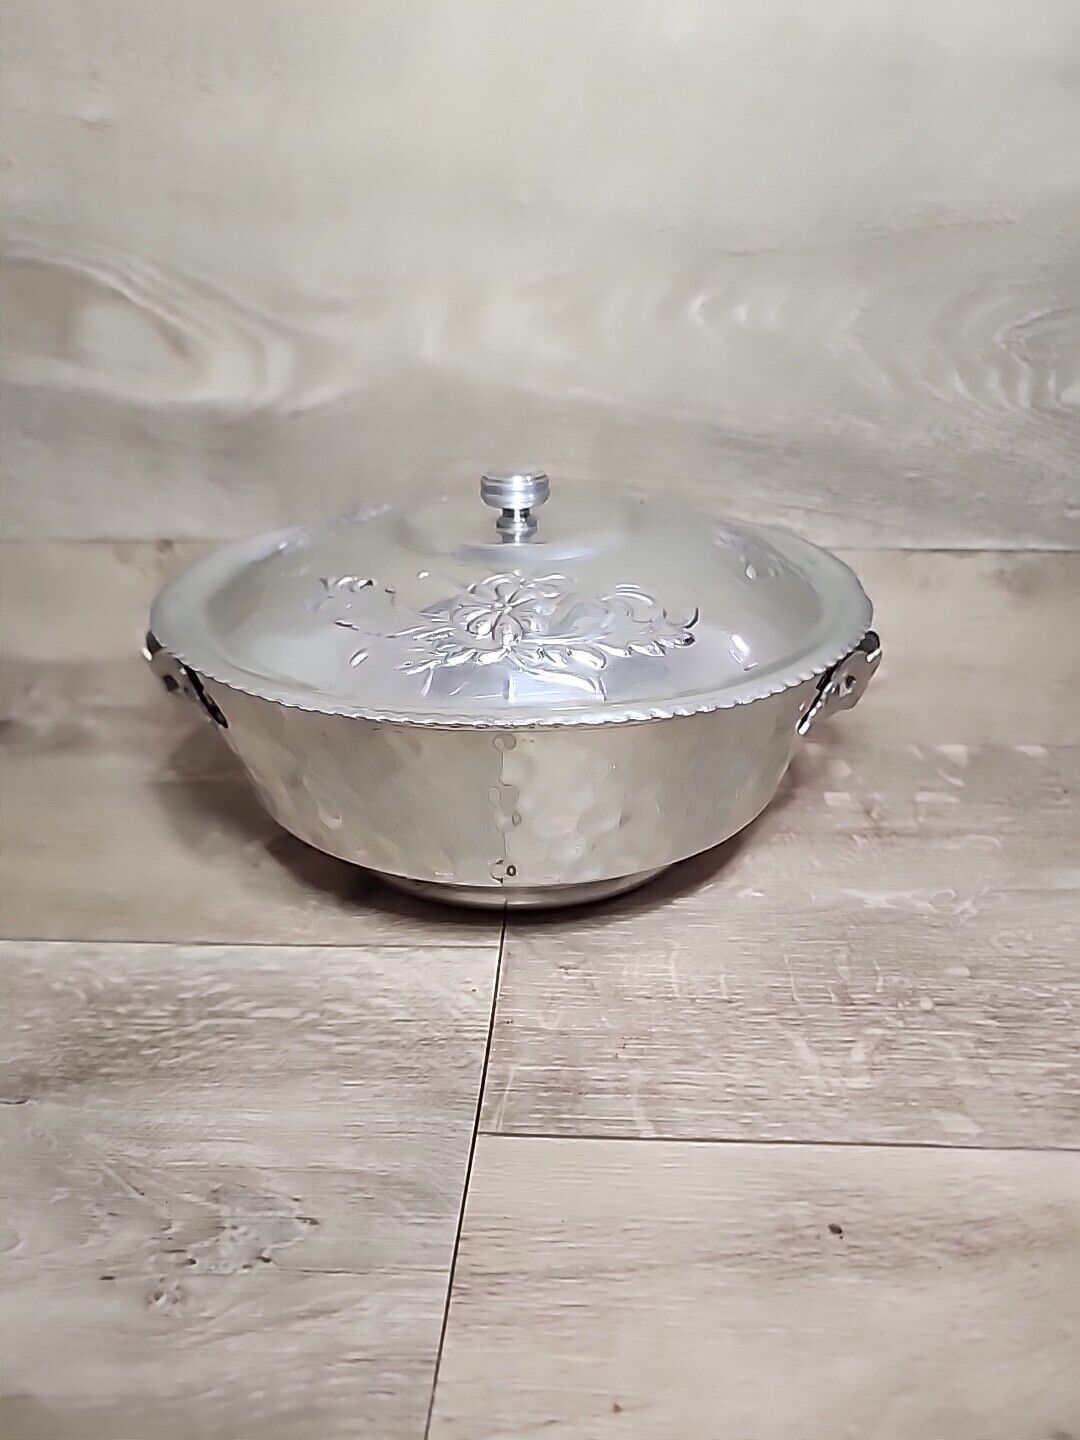 Vintage Nasco Hammered Aluminum Casserole Cover/Carrier with Lid Serving Dish